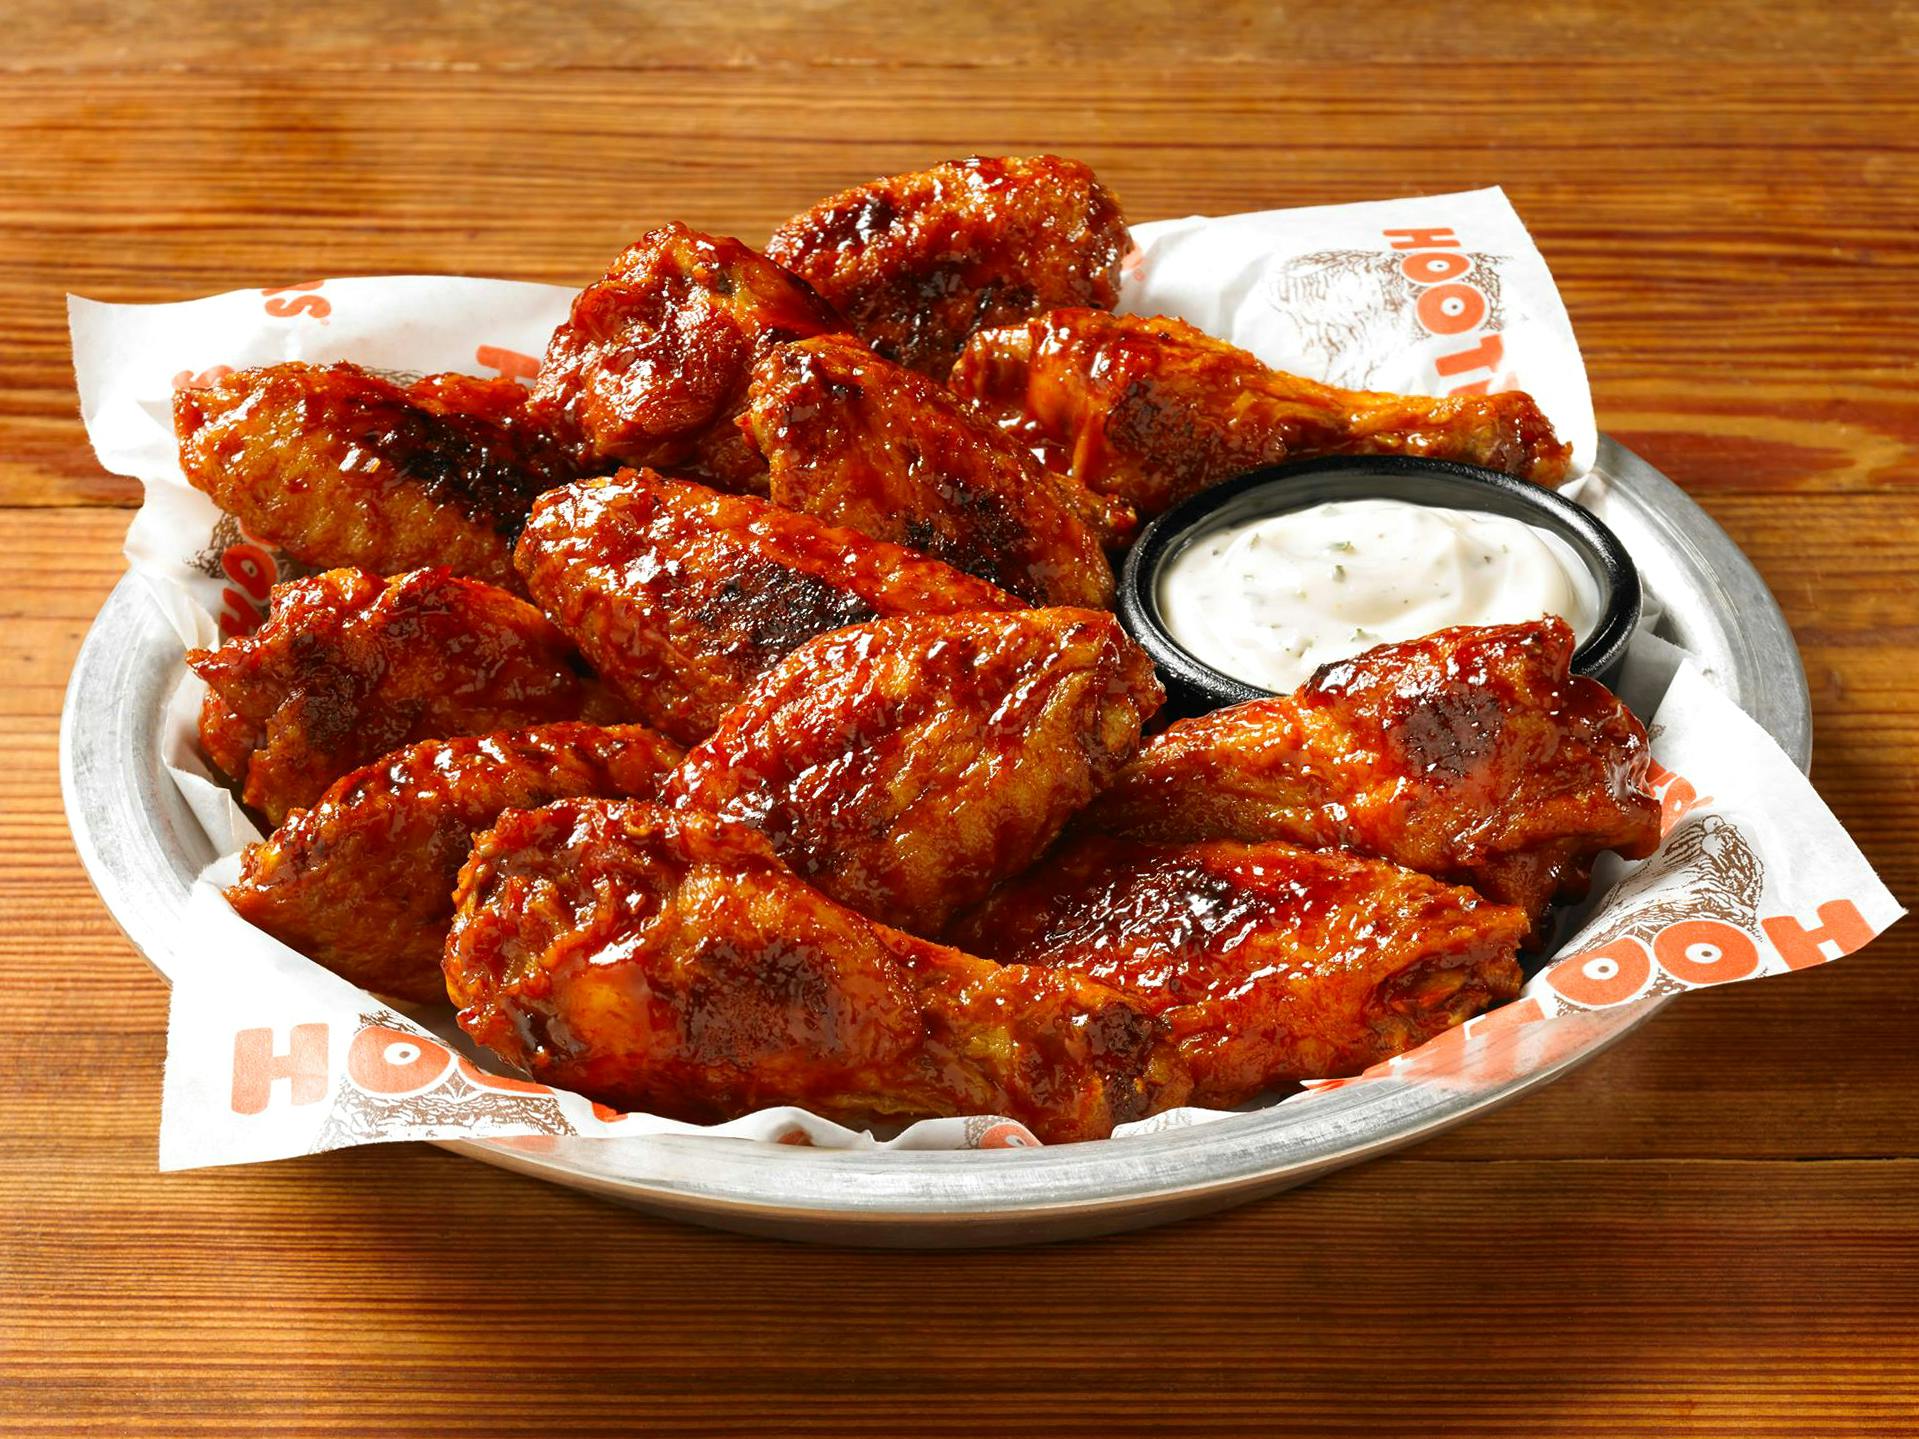 hooters 10-piece chicken wings